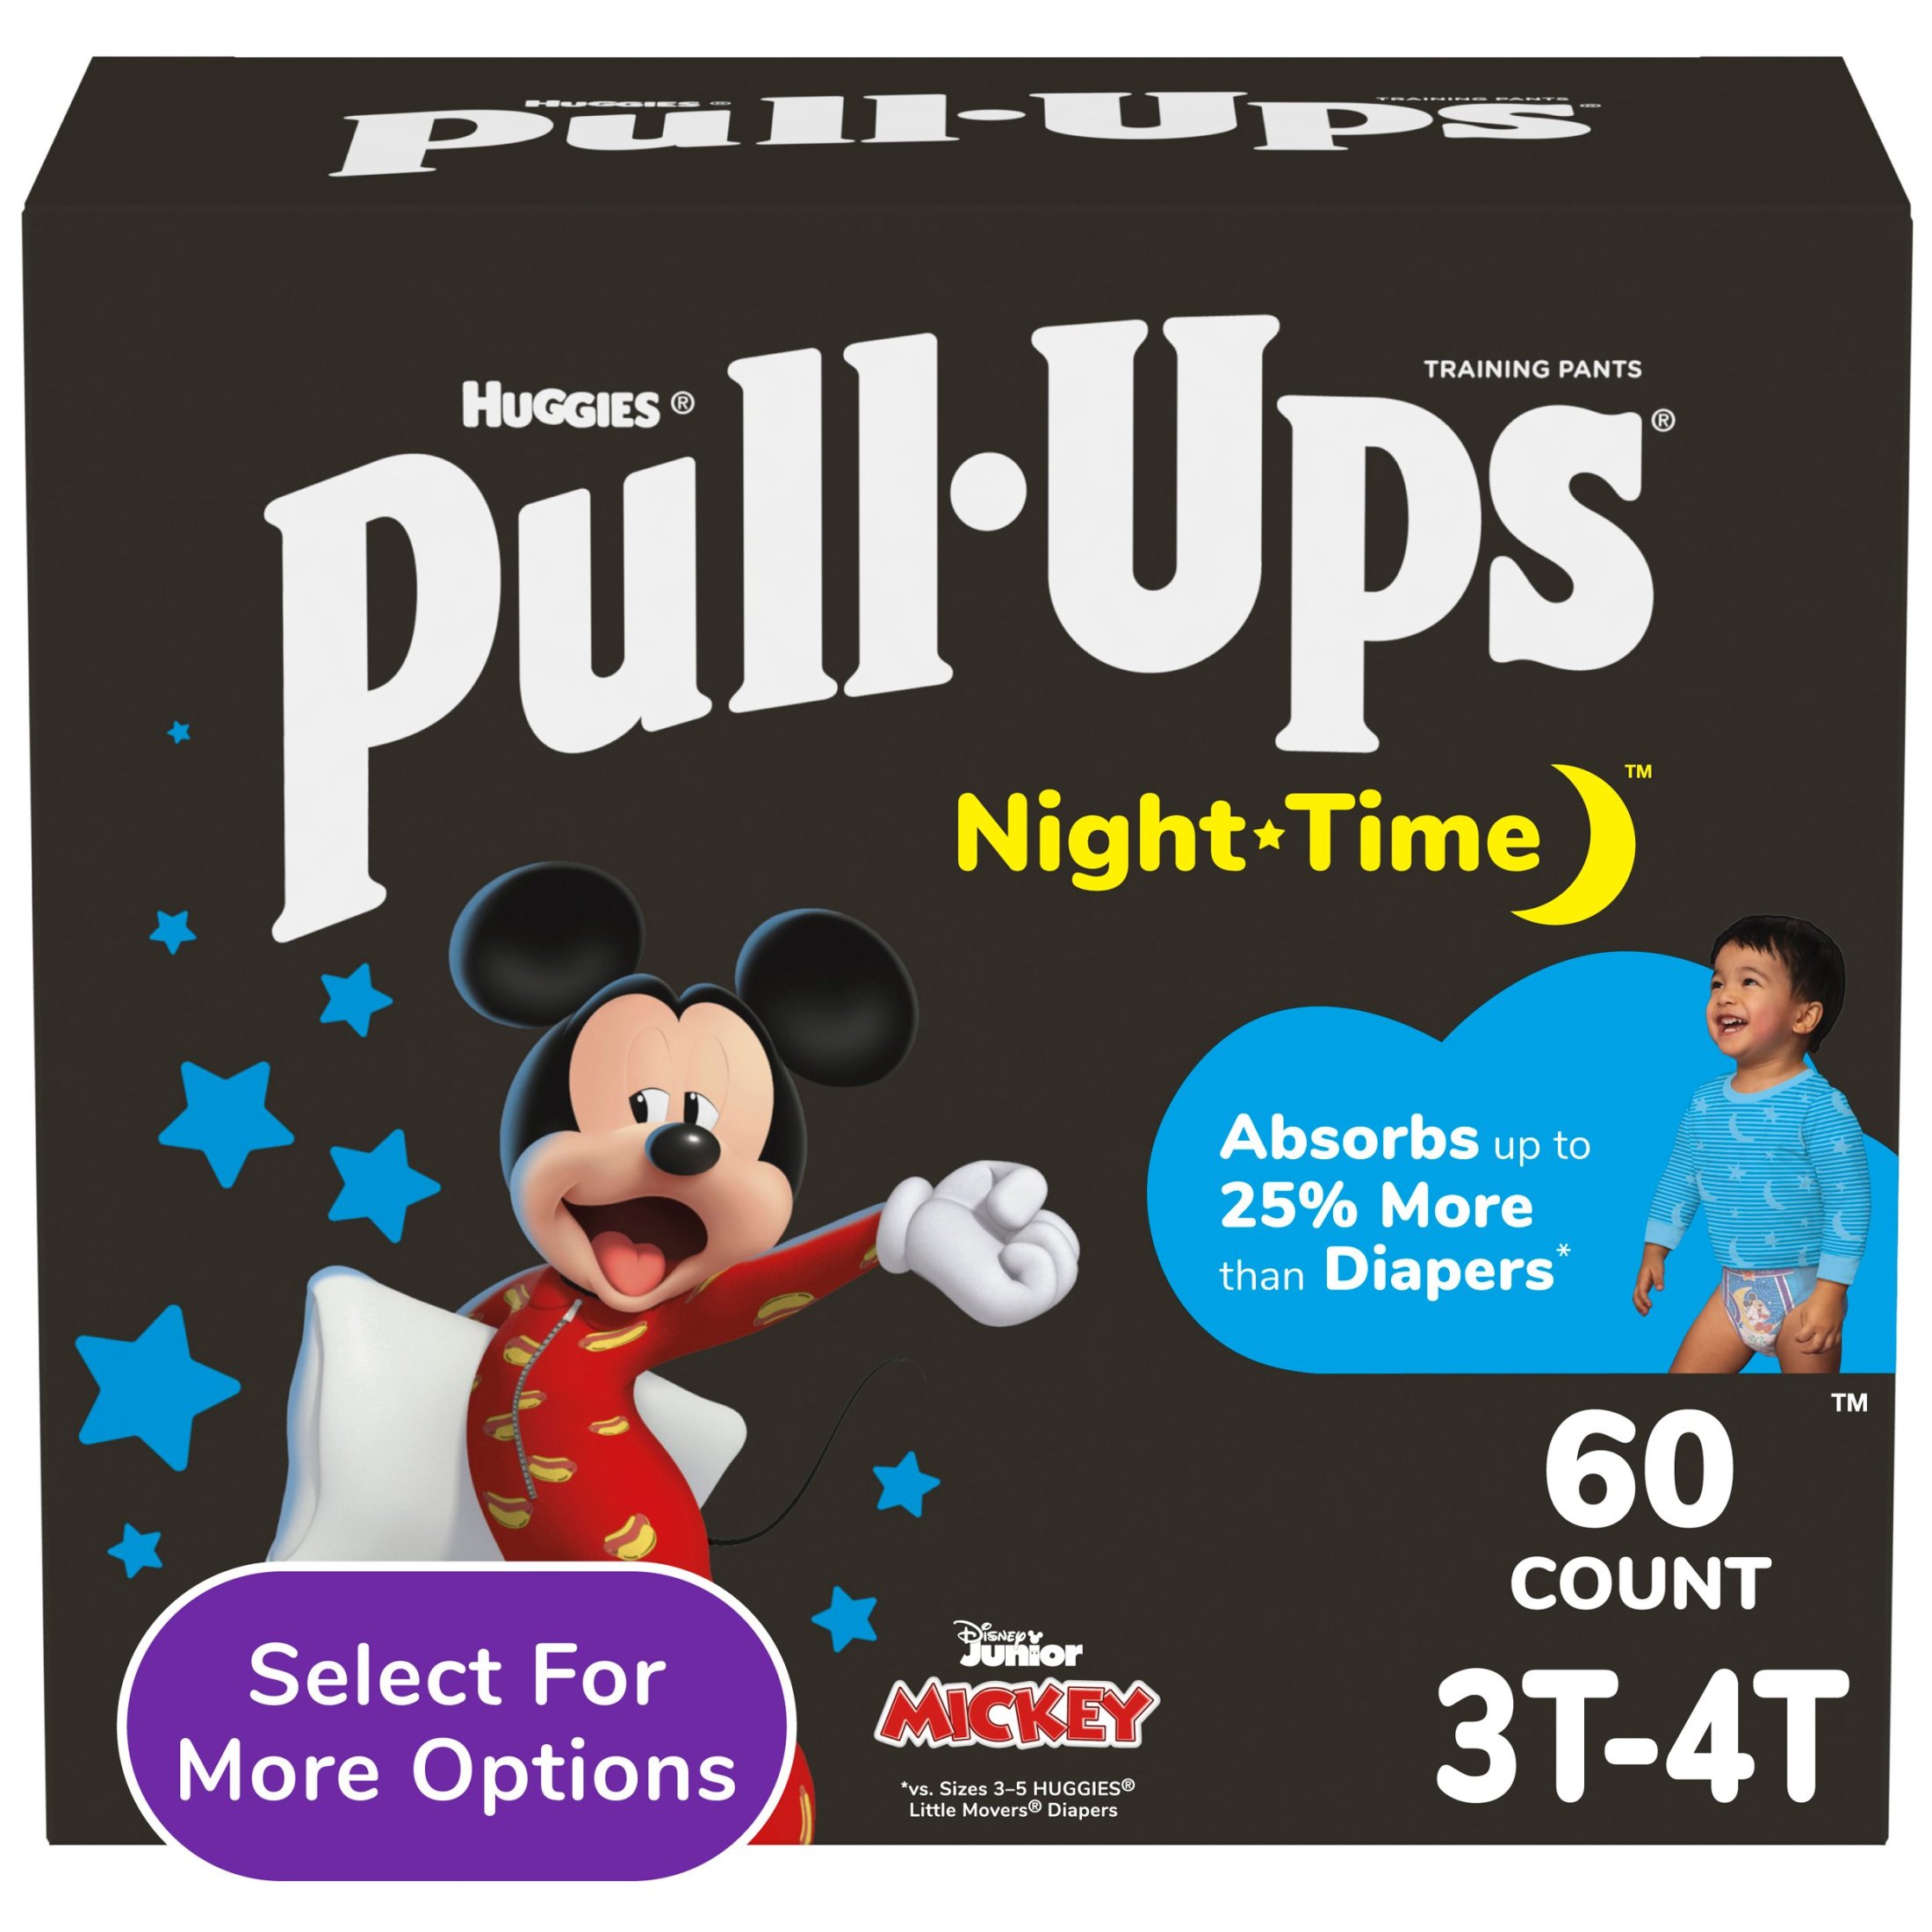 Pull-Ups Boys' Night-Time Training Pants, 3T-4T (32-40 lbs), 60 Ct (Select for More Options) - image 1 of 12